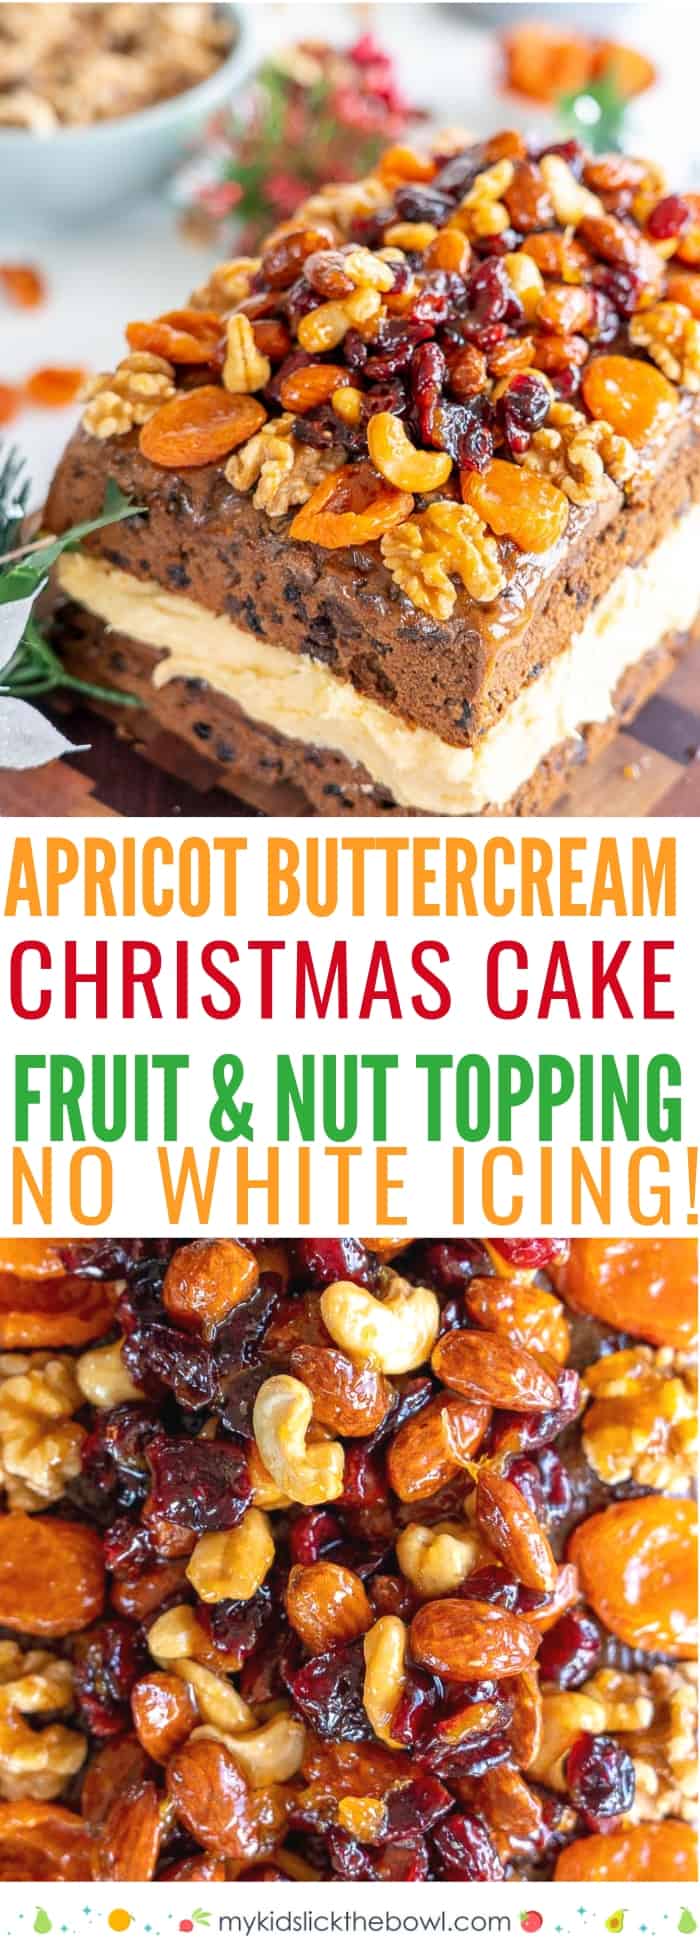 Christmas Cake Decorating Ideas Without Icing